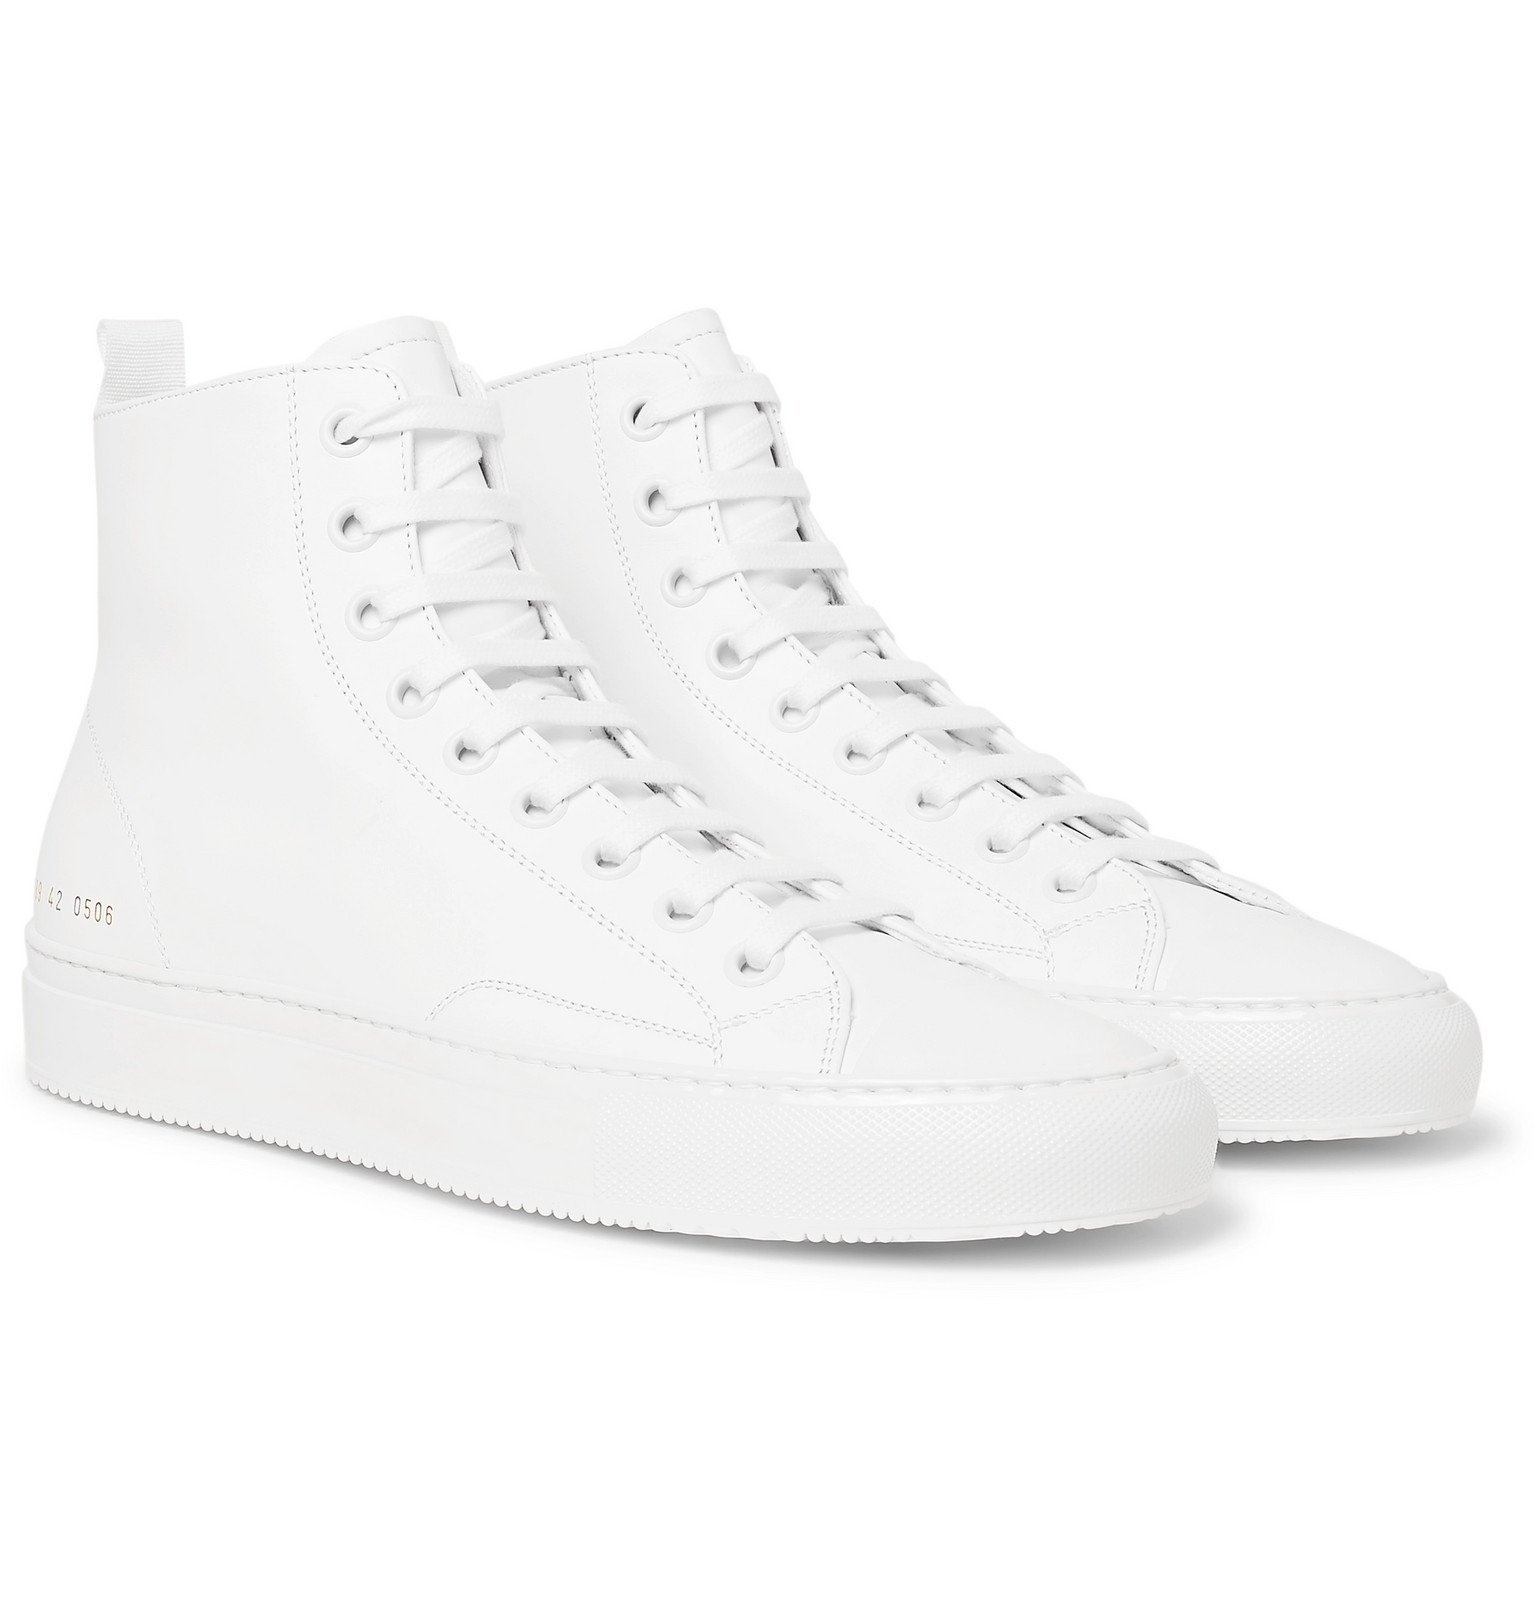 Tournament Leather High-Top Sneakers 